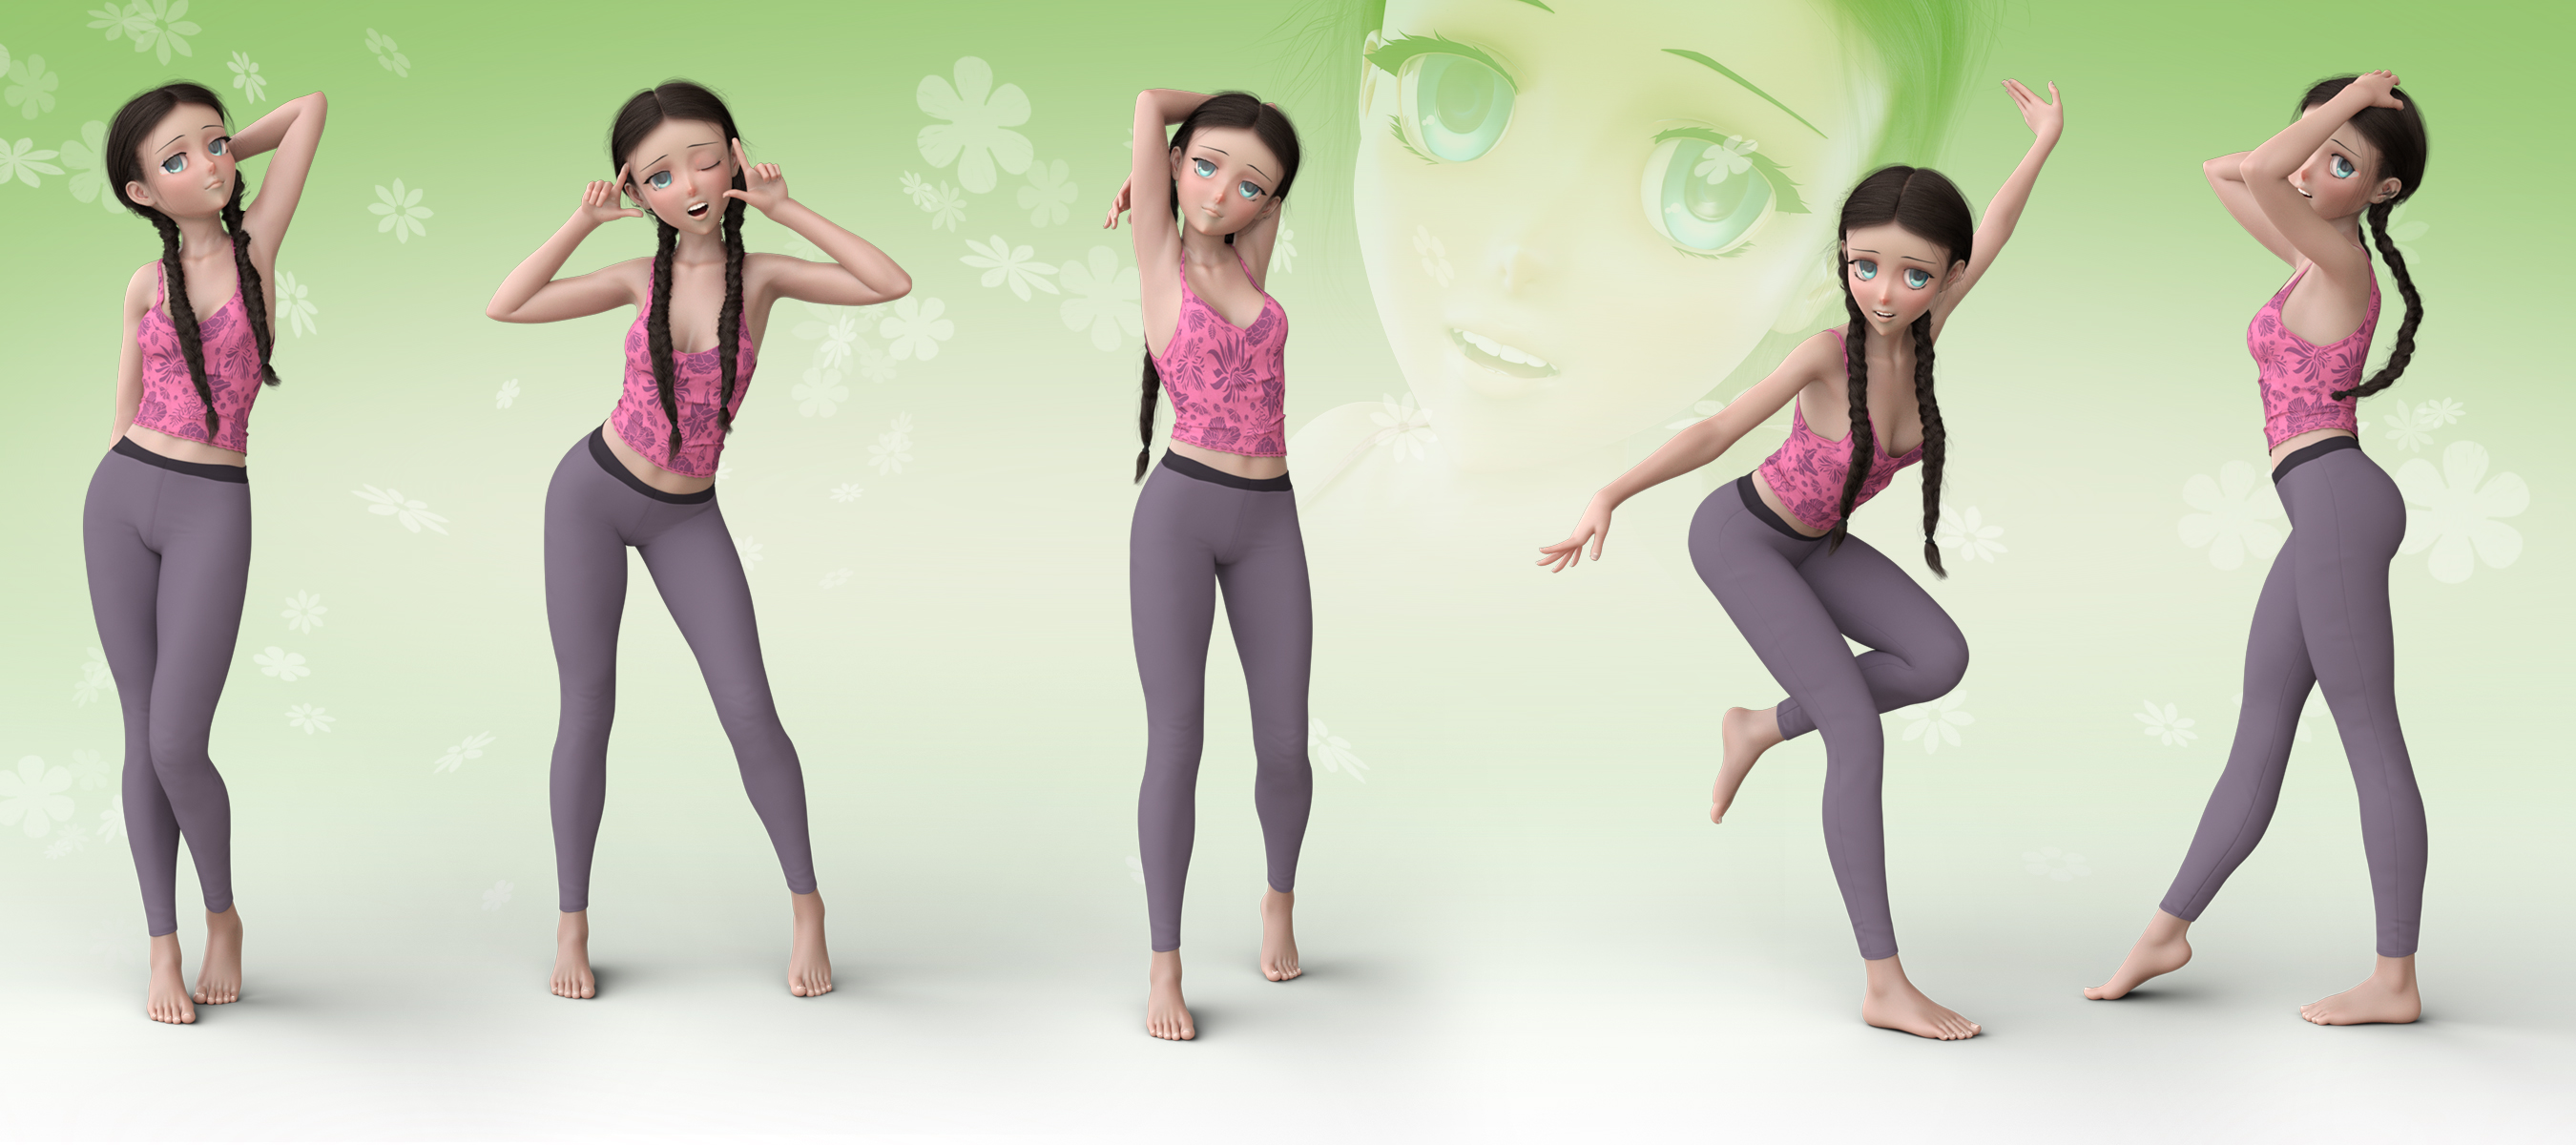 Z Sweetie Pie - Poses & Expressions for Sakura 8 and Genesis 8 Female by: Zeddicuss, 3D Models by Daz 3D